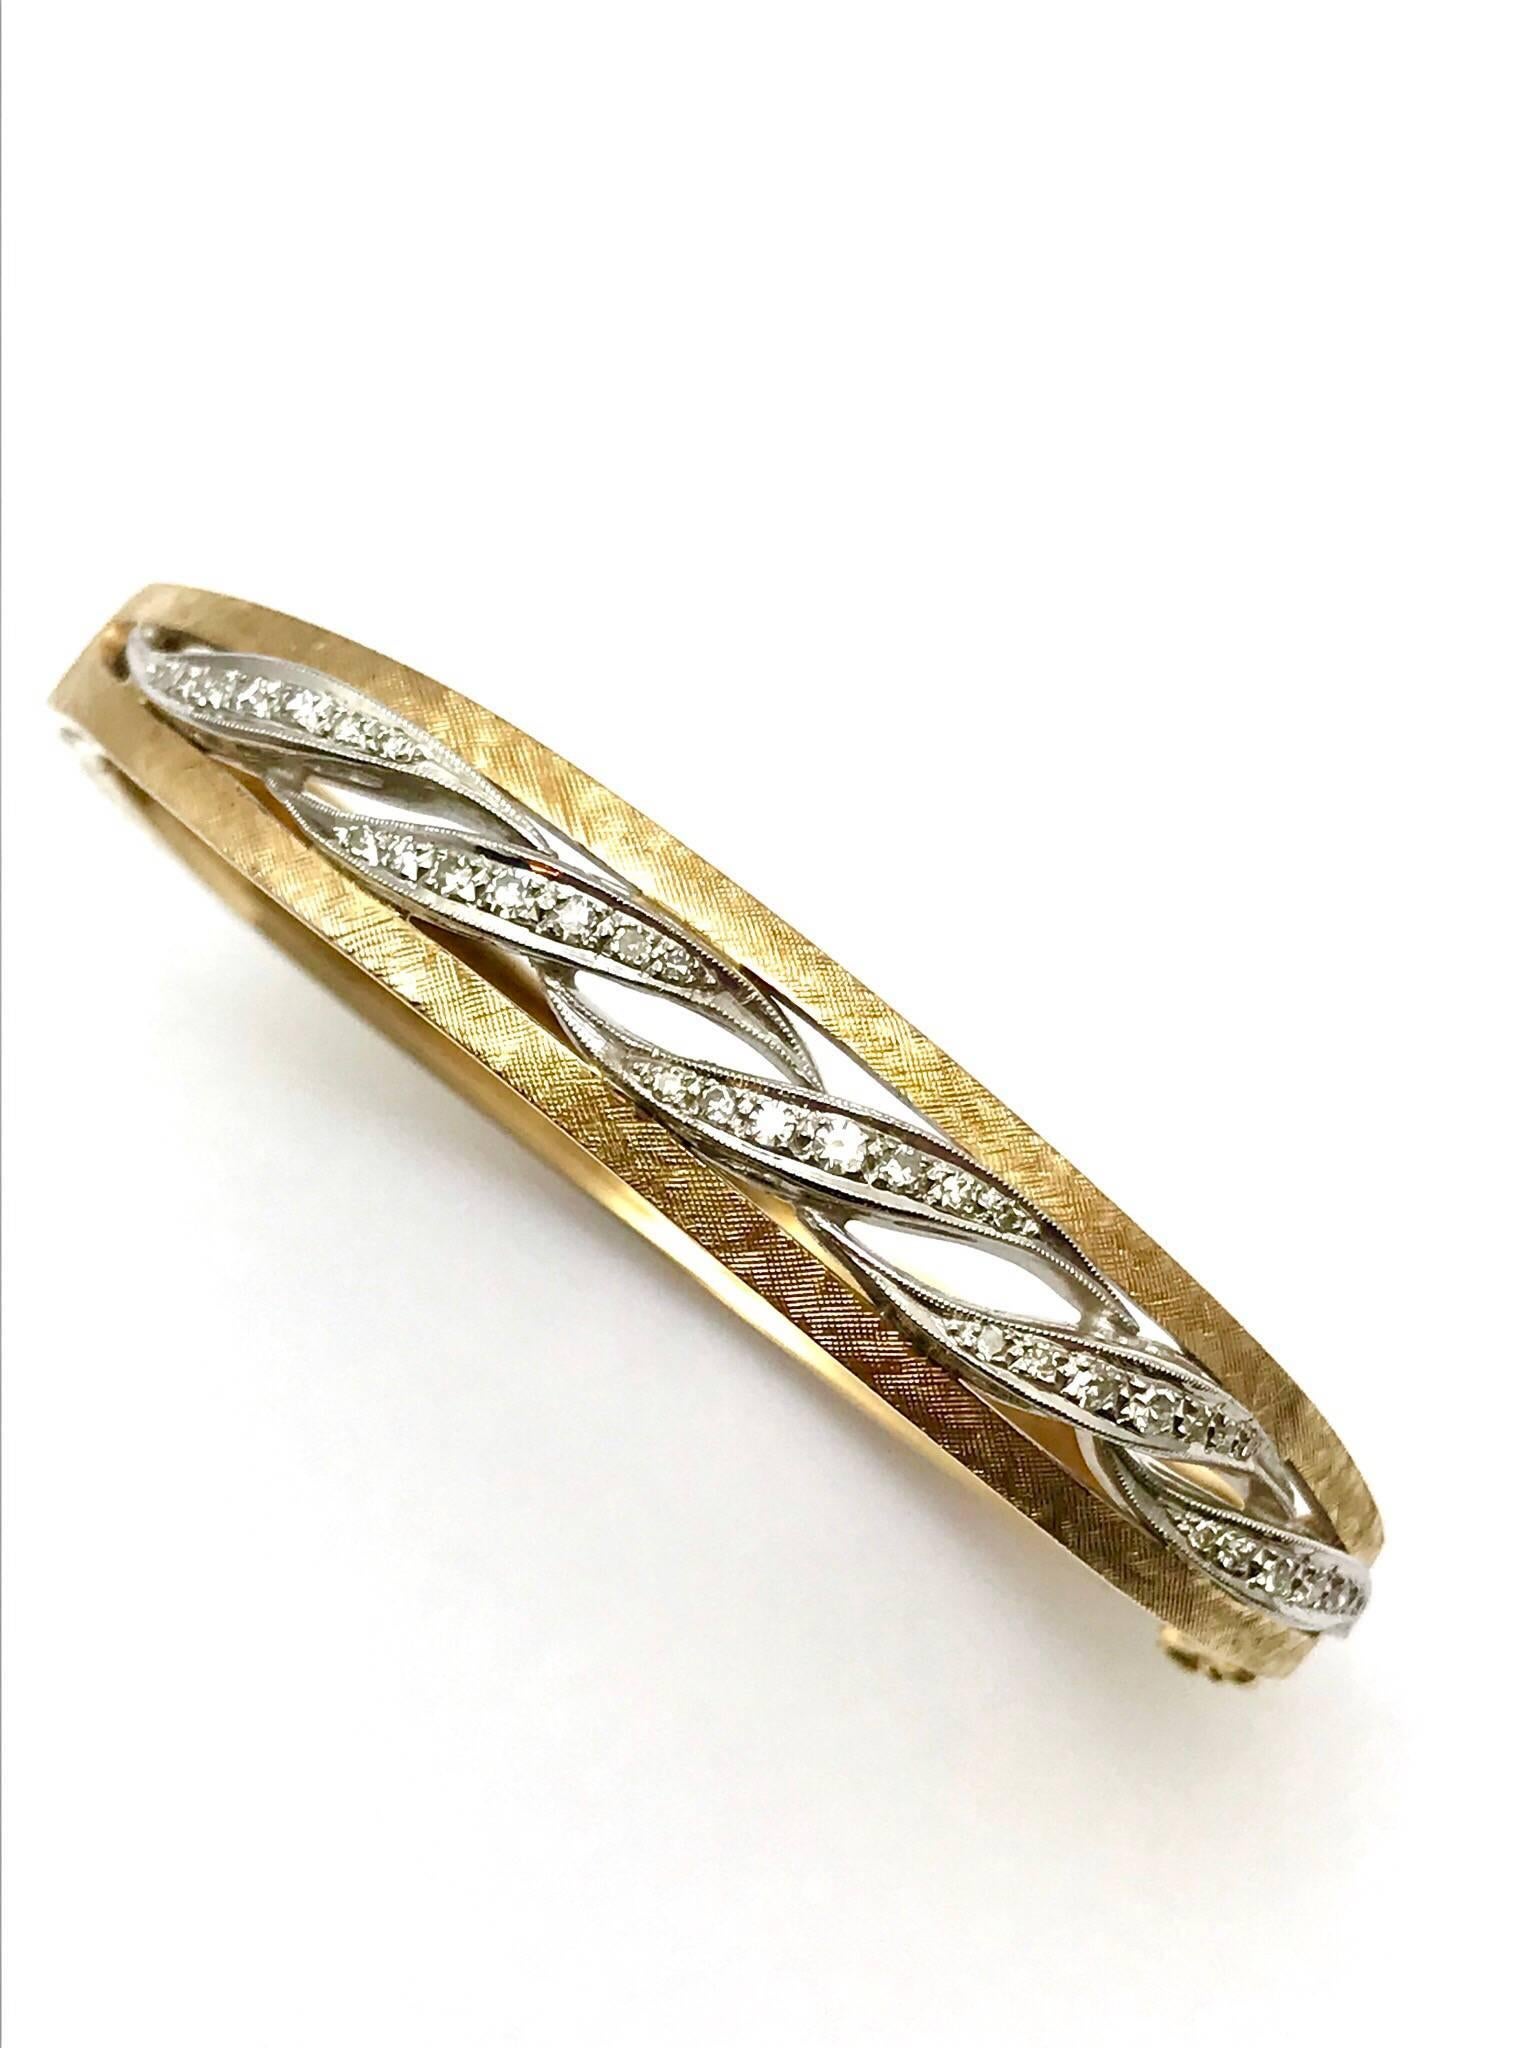 A round brilliant 14 carat white and yellow gold wave bangle bracelet.  The bracelet is designed with a textured yellow gold pattern, containing 35 round brilliant diamonds set in white gold on the top half of the bangle, between the yellow gold. 